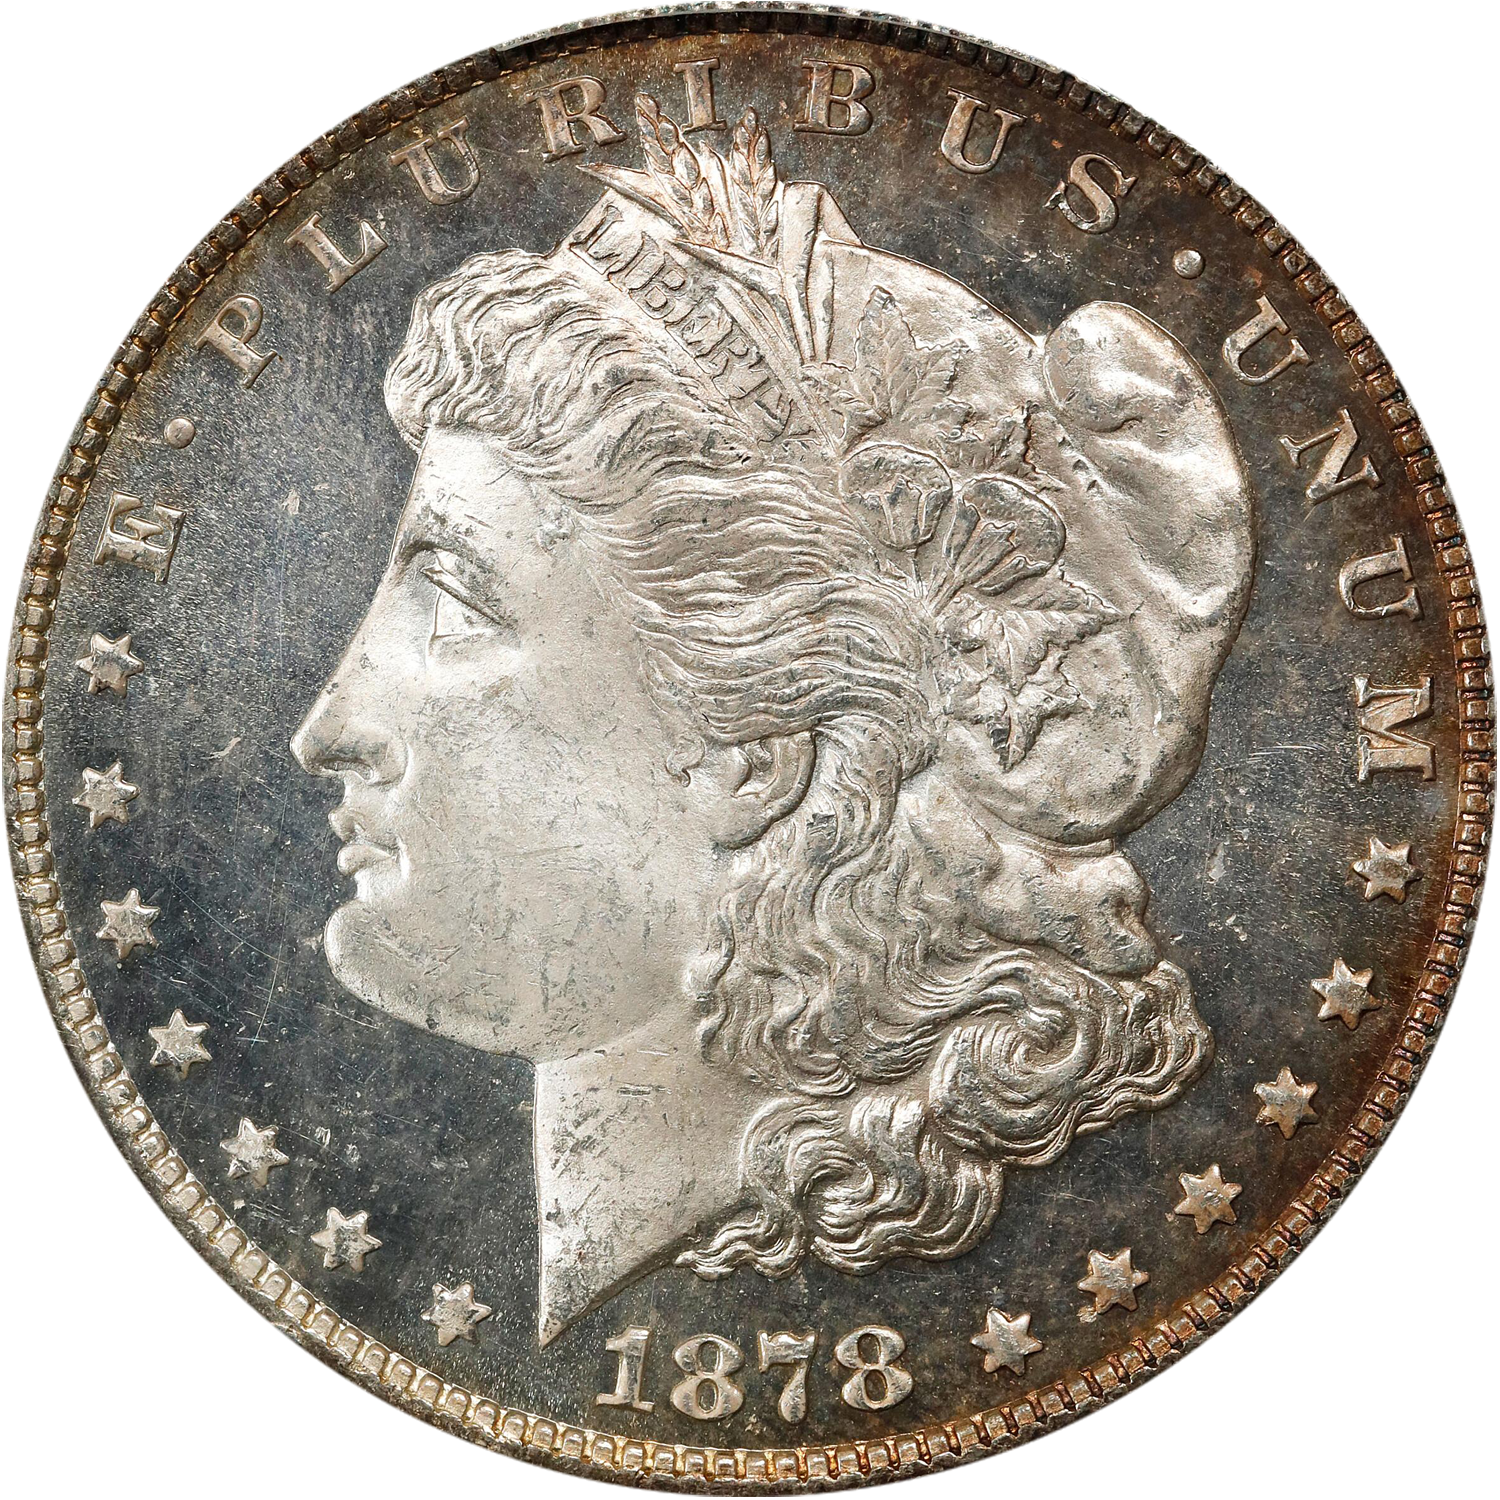 1878 7 over 8 tail feathers morgan dollar